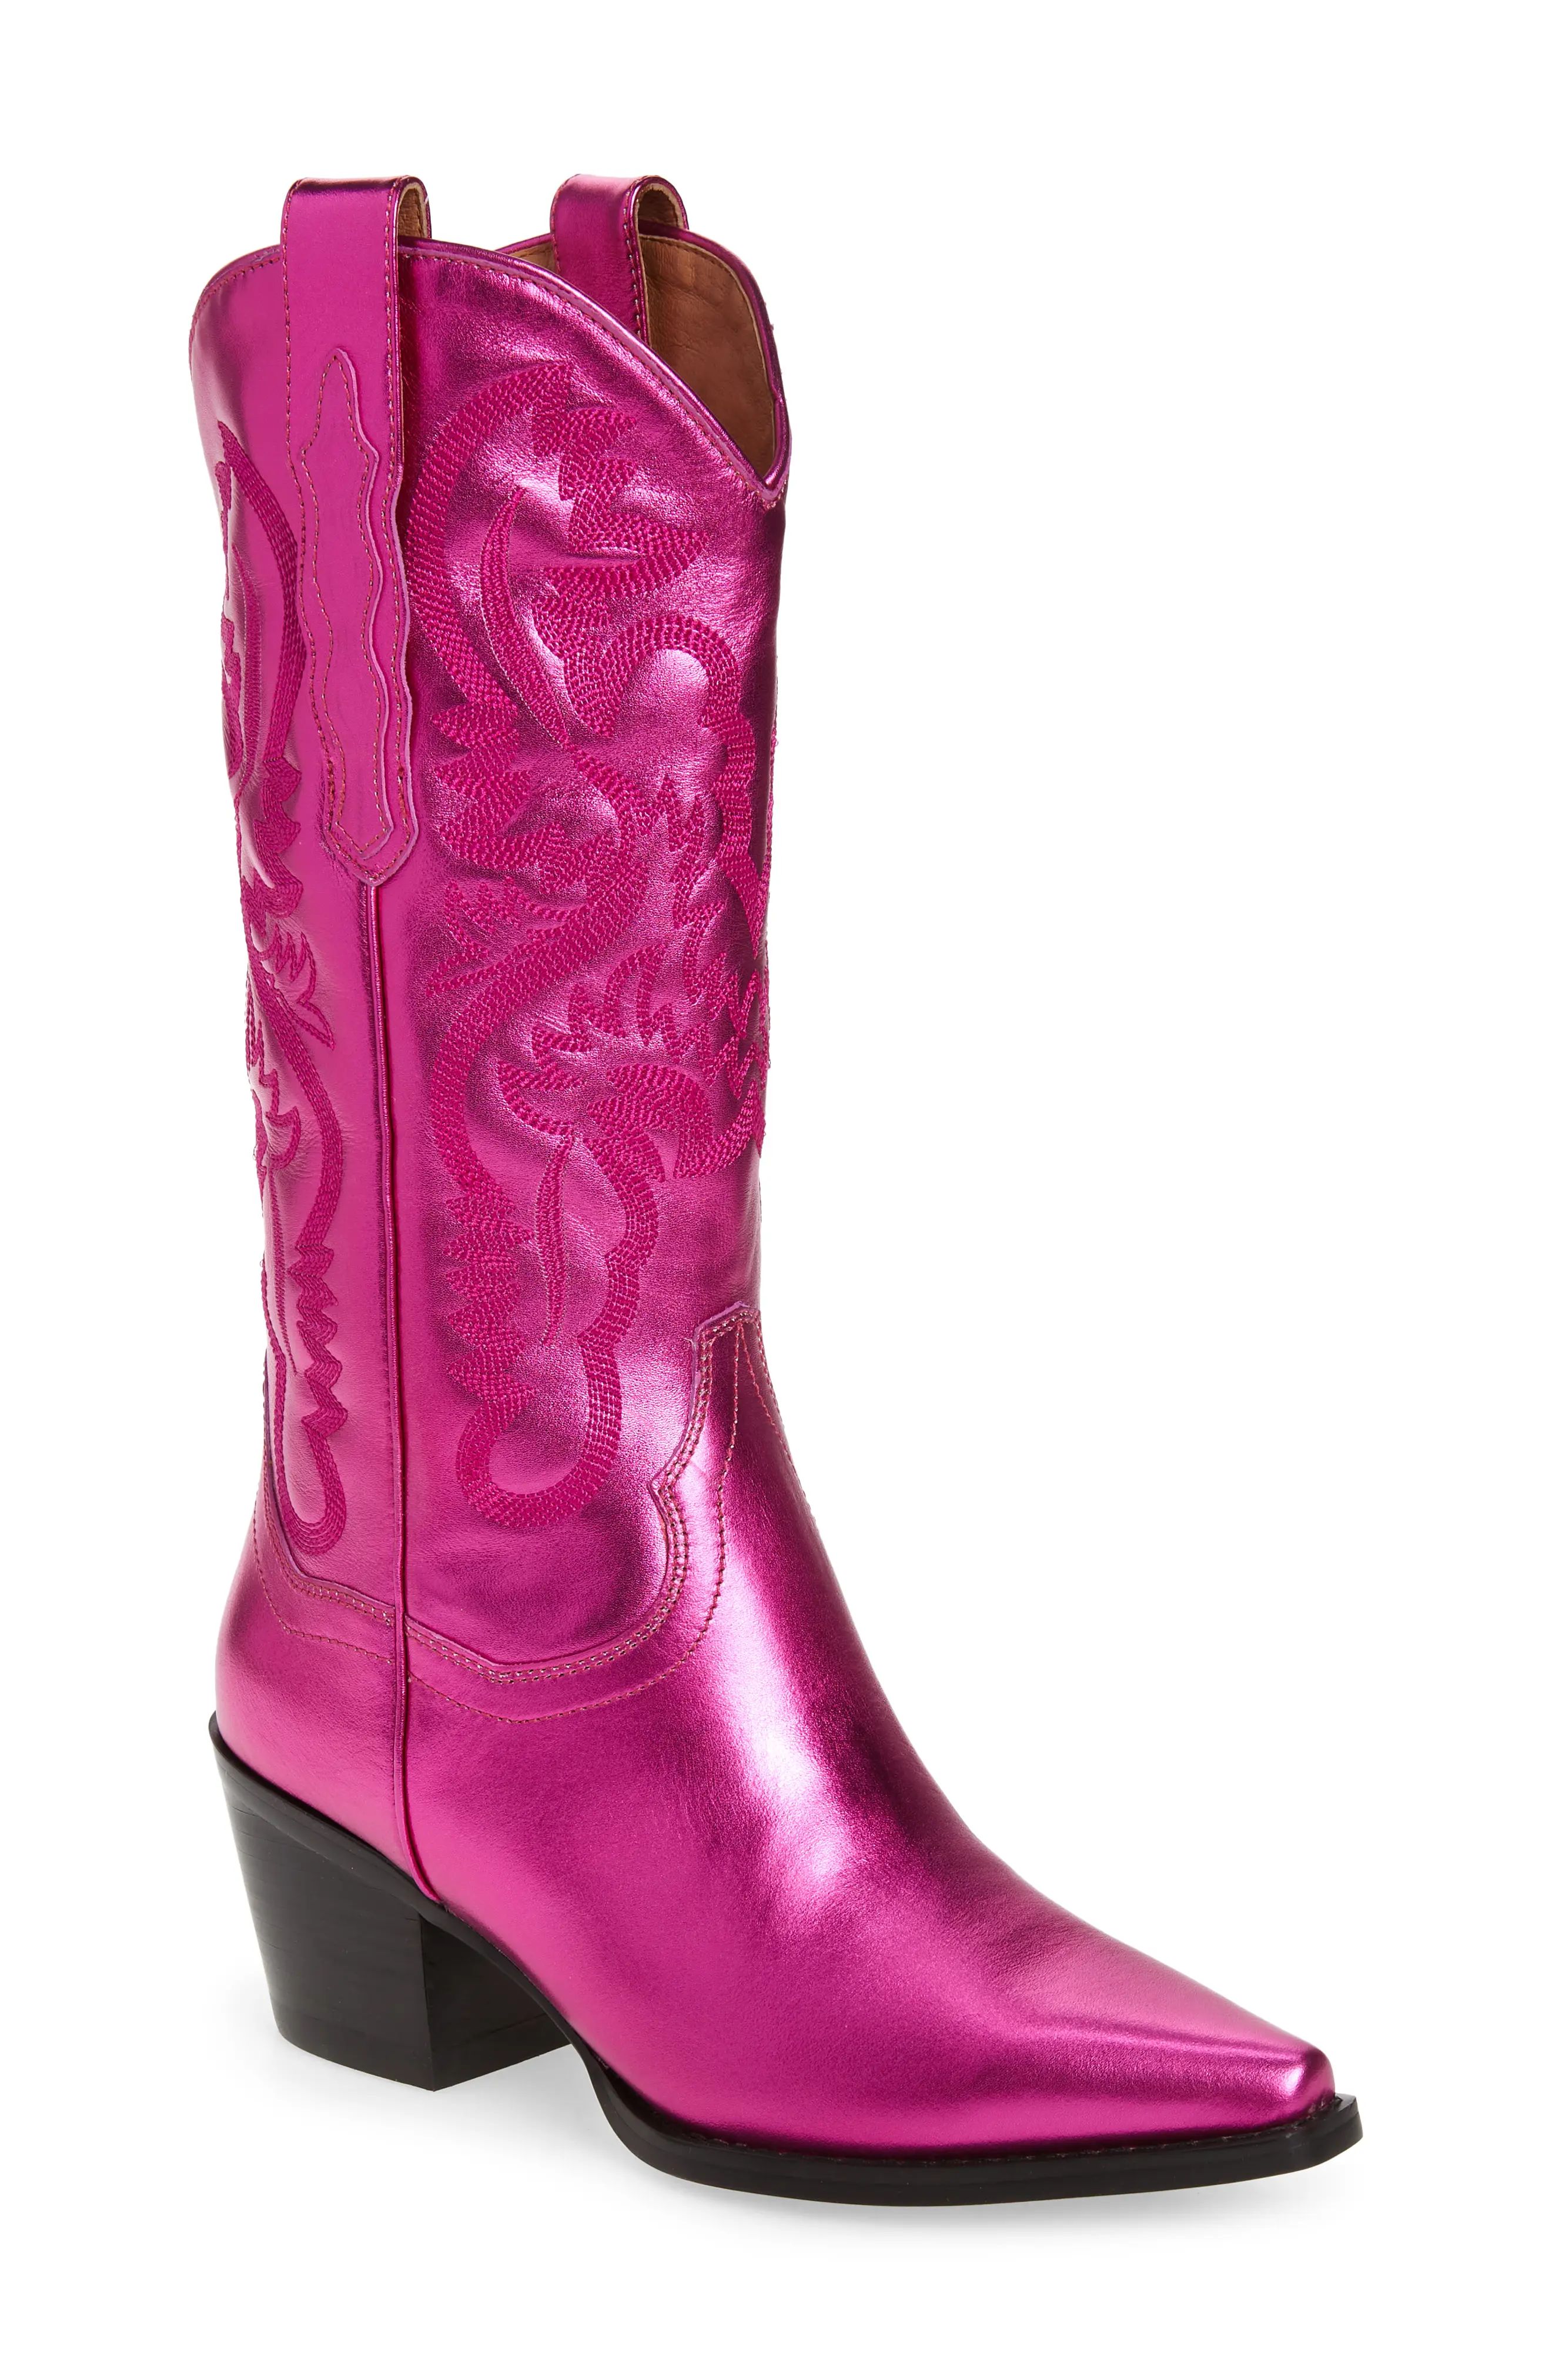 Jeffrey Campbell Dagget Western Boot, Size 10 in Fuchsia Metallic Leather at Nordstrom | Nordstrom